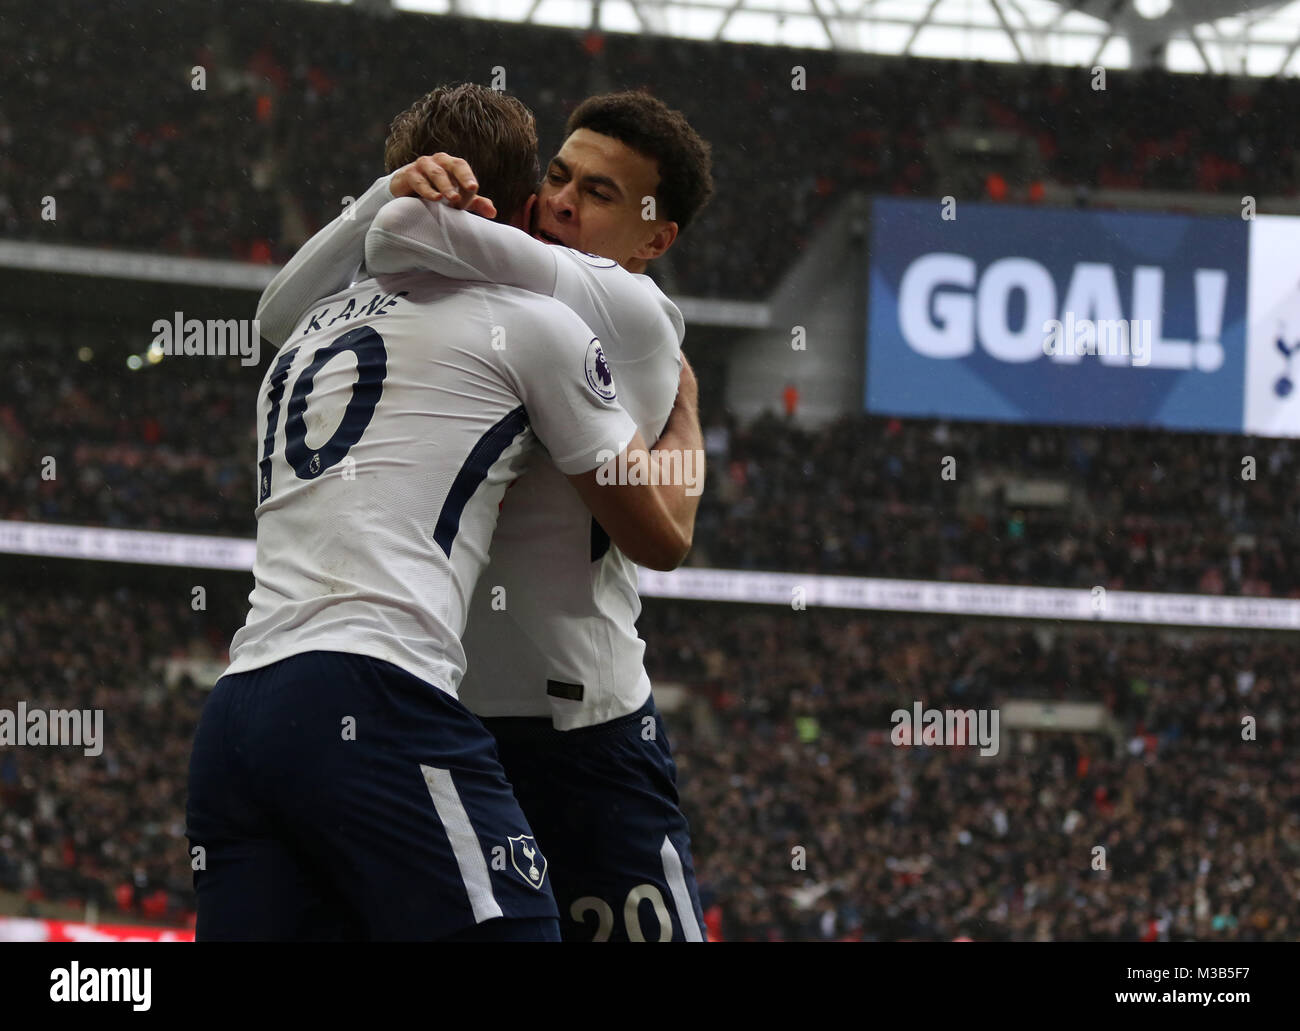 London, UK. 10th Feb, 2018. Dele Alli (TH) congratulates goalscorere Harry Kane (TH) (1-0) at the English Premier League football match between Tottenham Hotspur v Arsenal at Wembley Stadium, London, on February 10, 2018. **THIS PICTURE IS FOR EDITORIAL USE ONLY** Credit: Paul Marriott/Alamy Live News Stock Photo